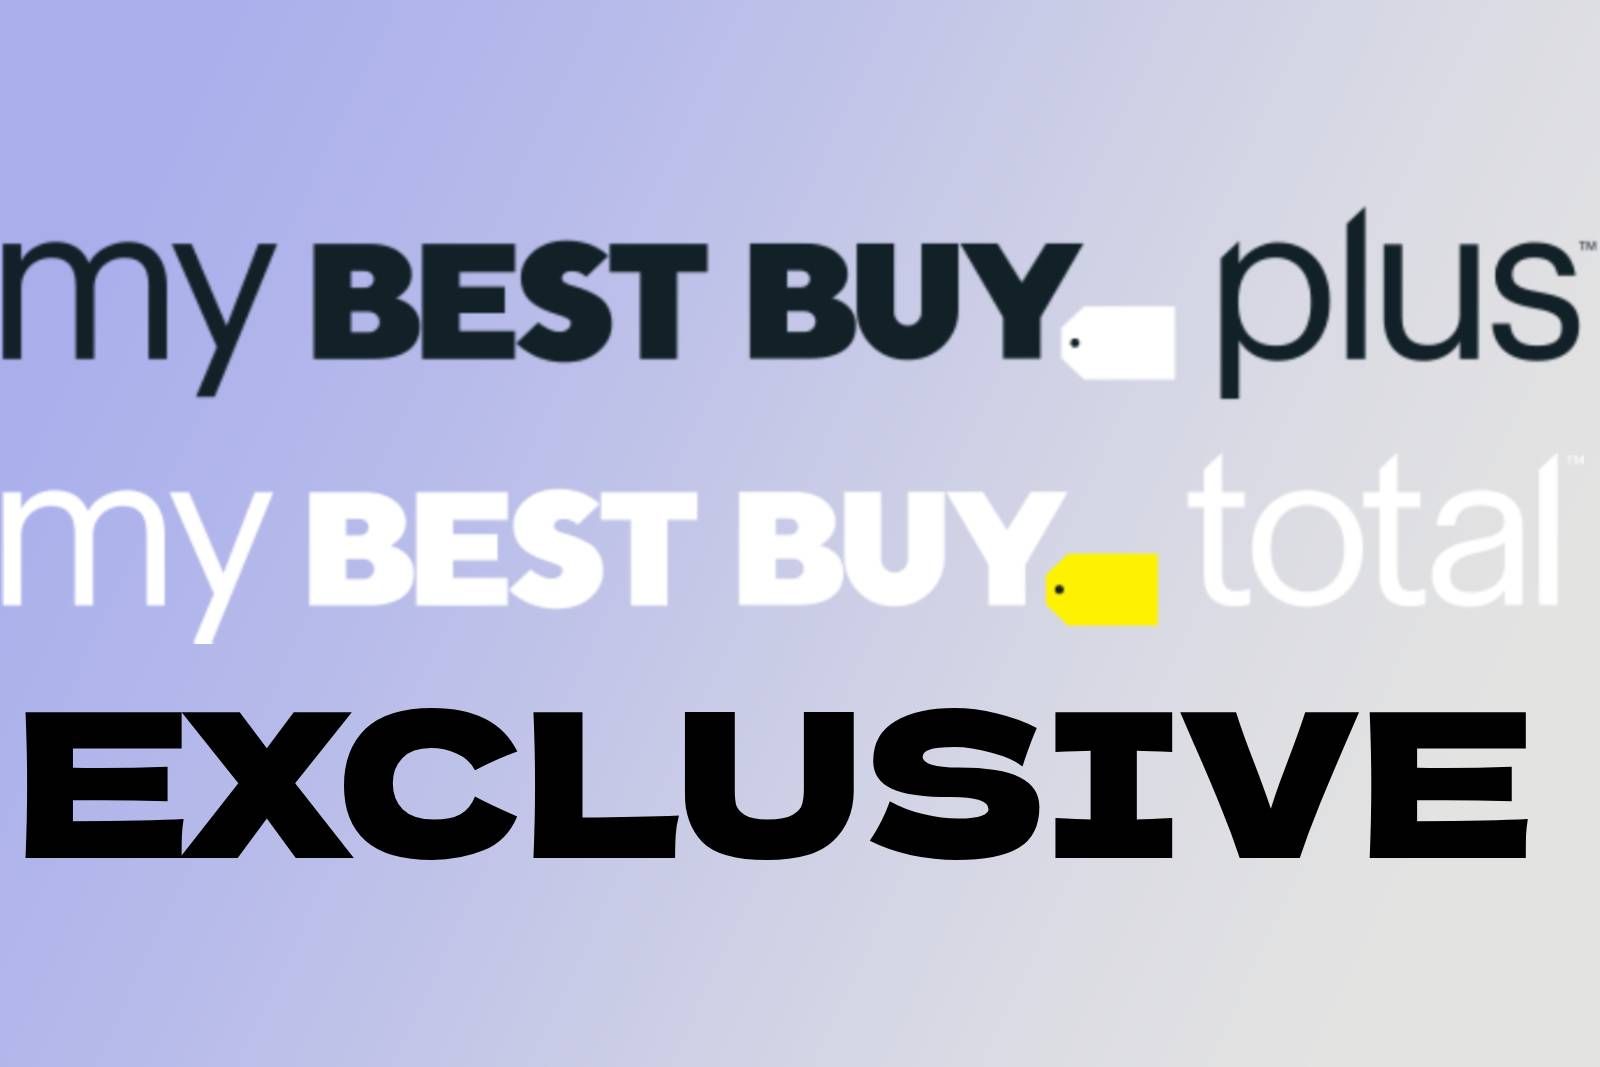 Best Buy is having a huge members-only sale filled with can't miss deals